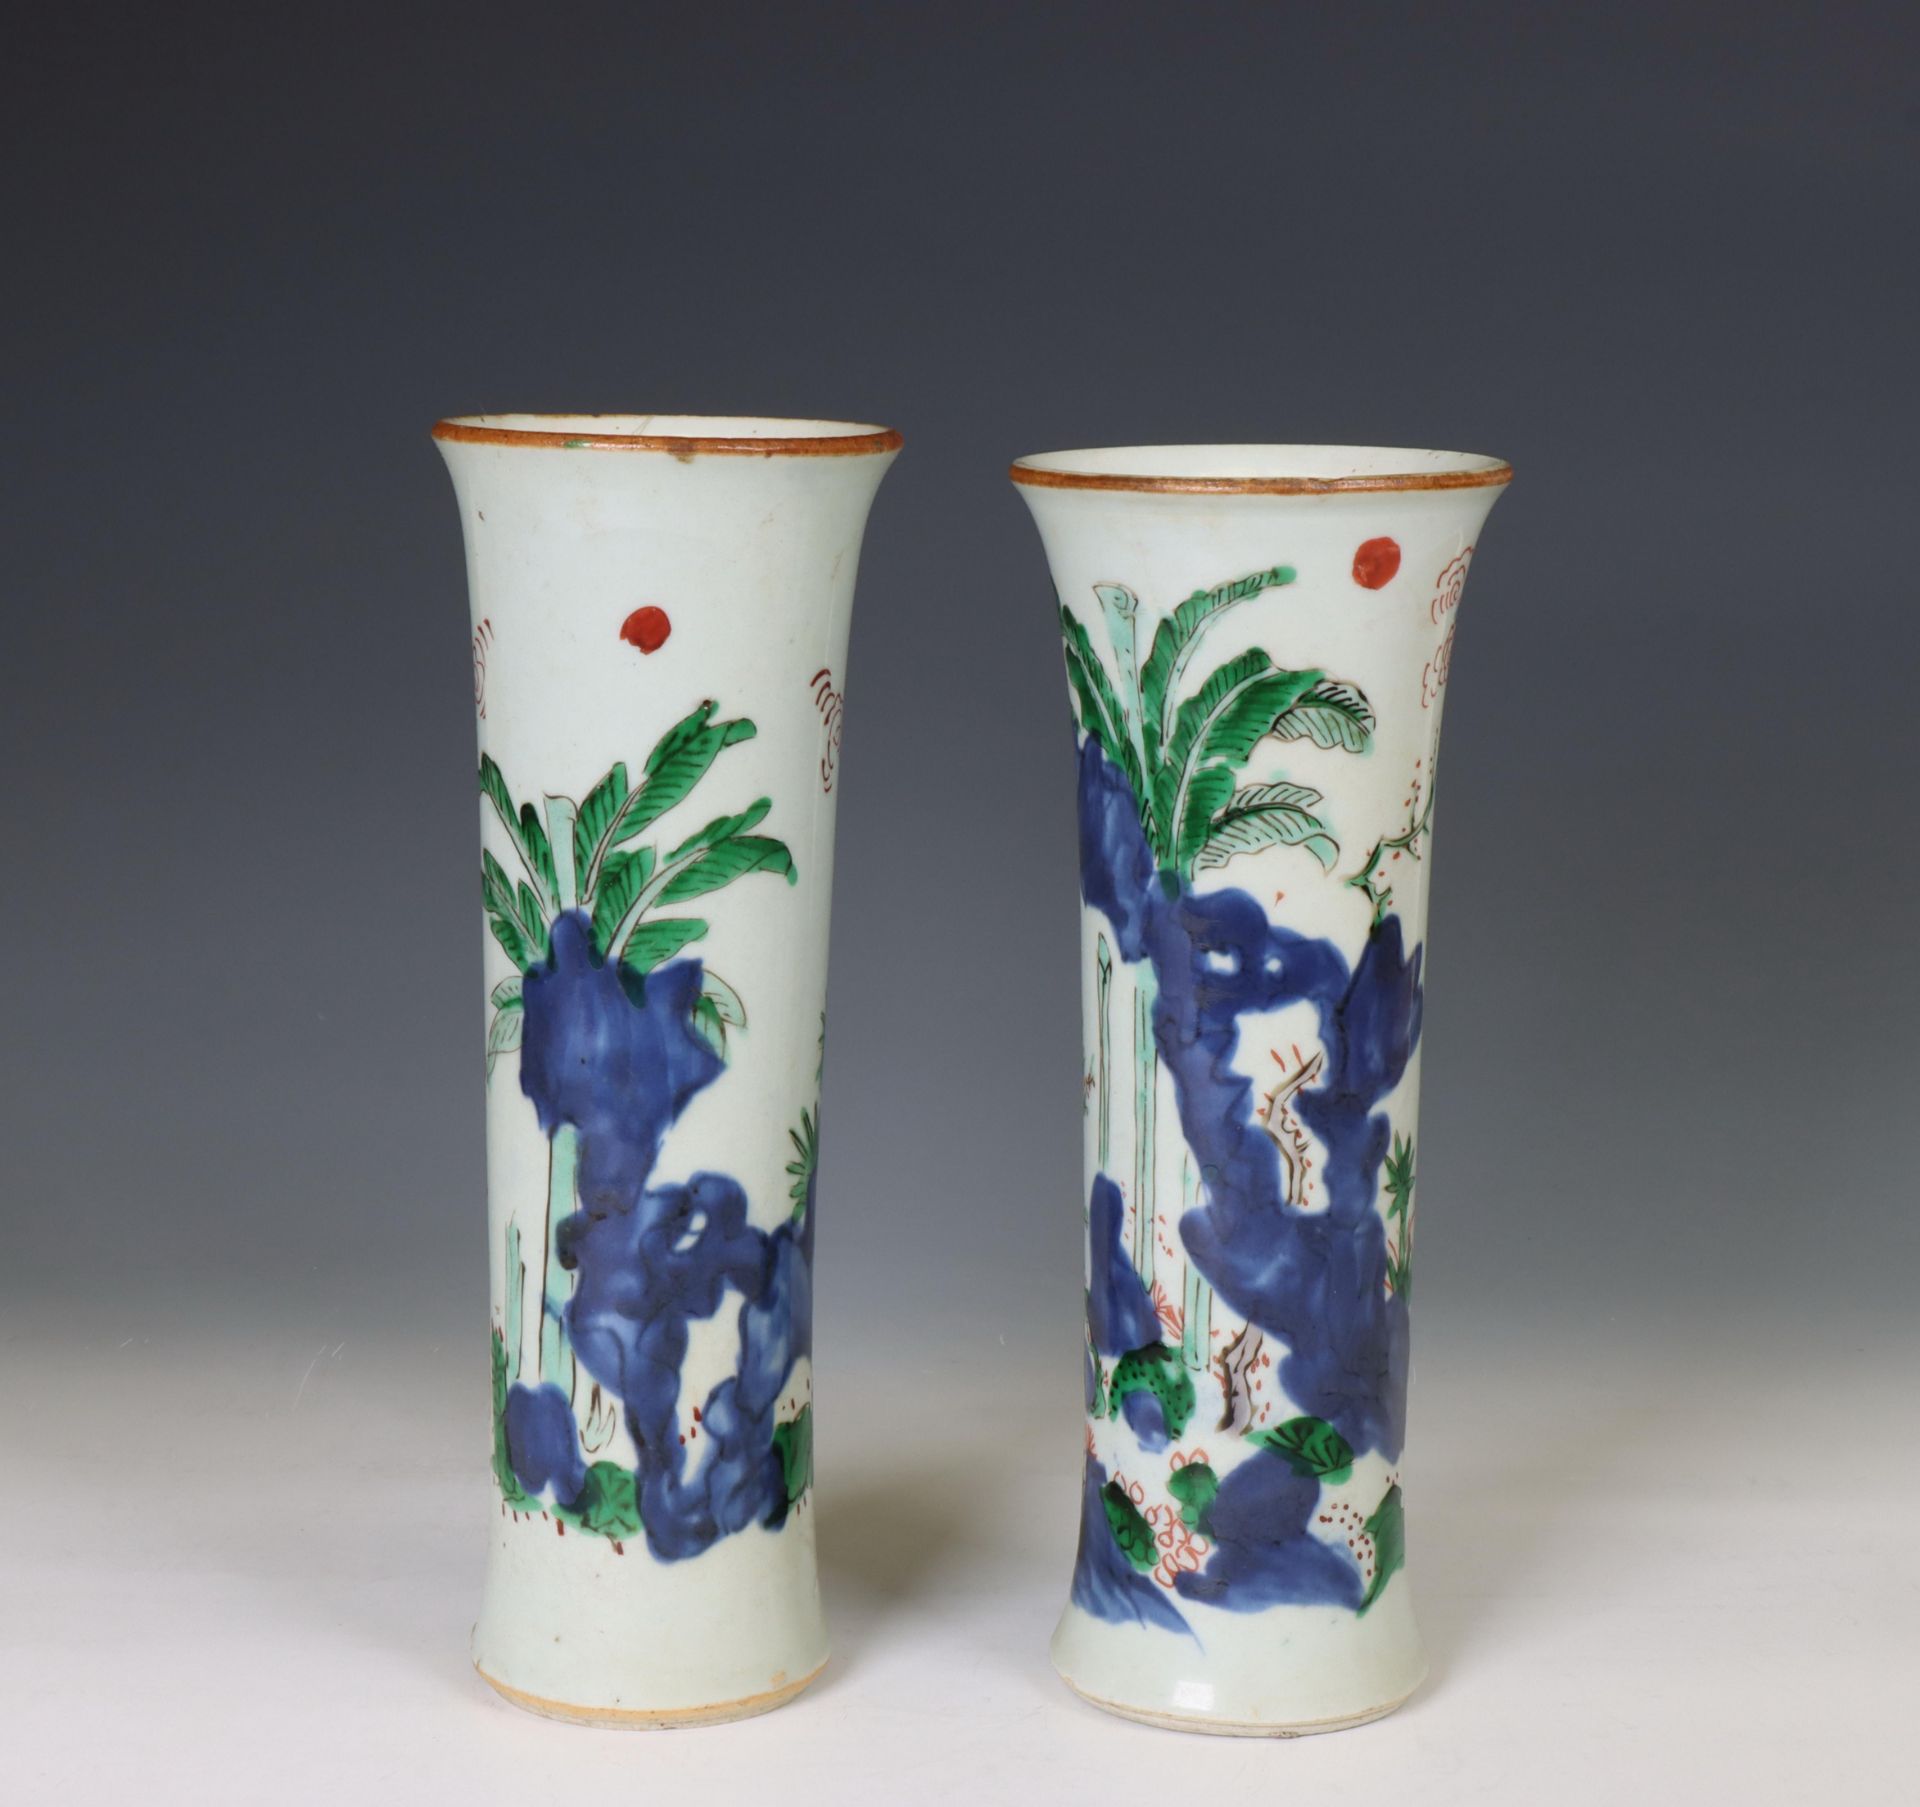 China, pair of wucai porcelain cylindrical vases, probably 17th century, - Image 2 of 3